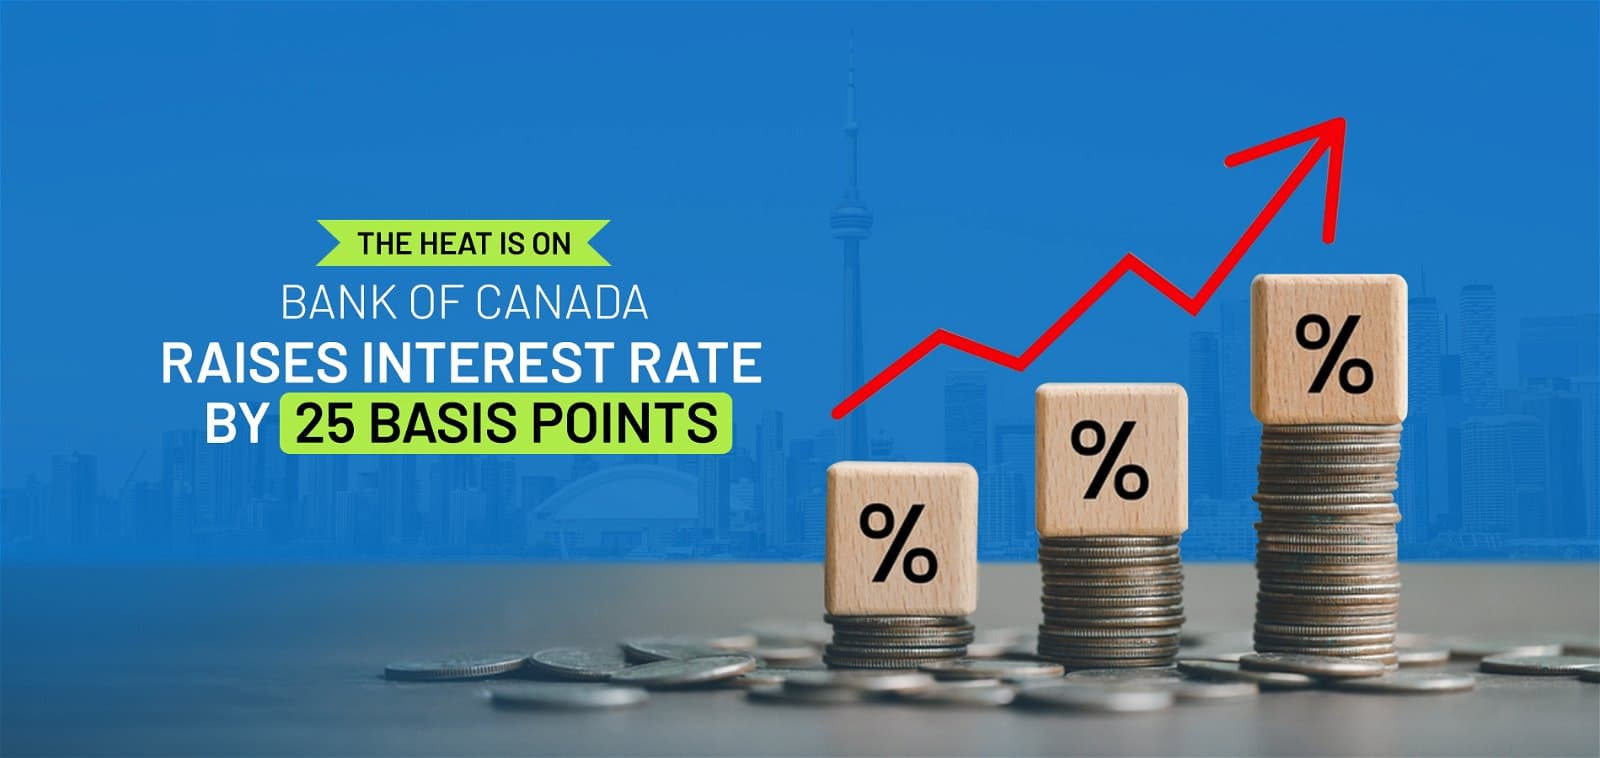 The Heat Is On: Bank of Canada Raises Interest Rate by 25 Basis Points